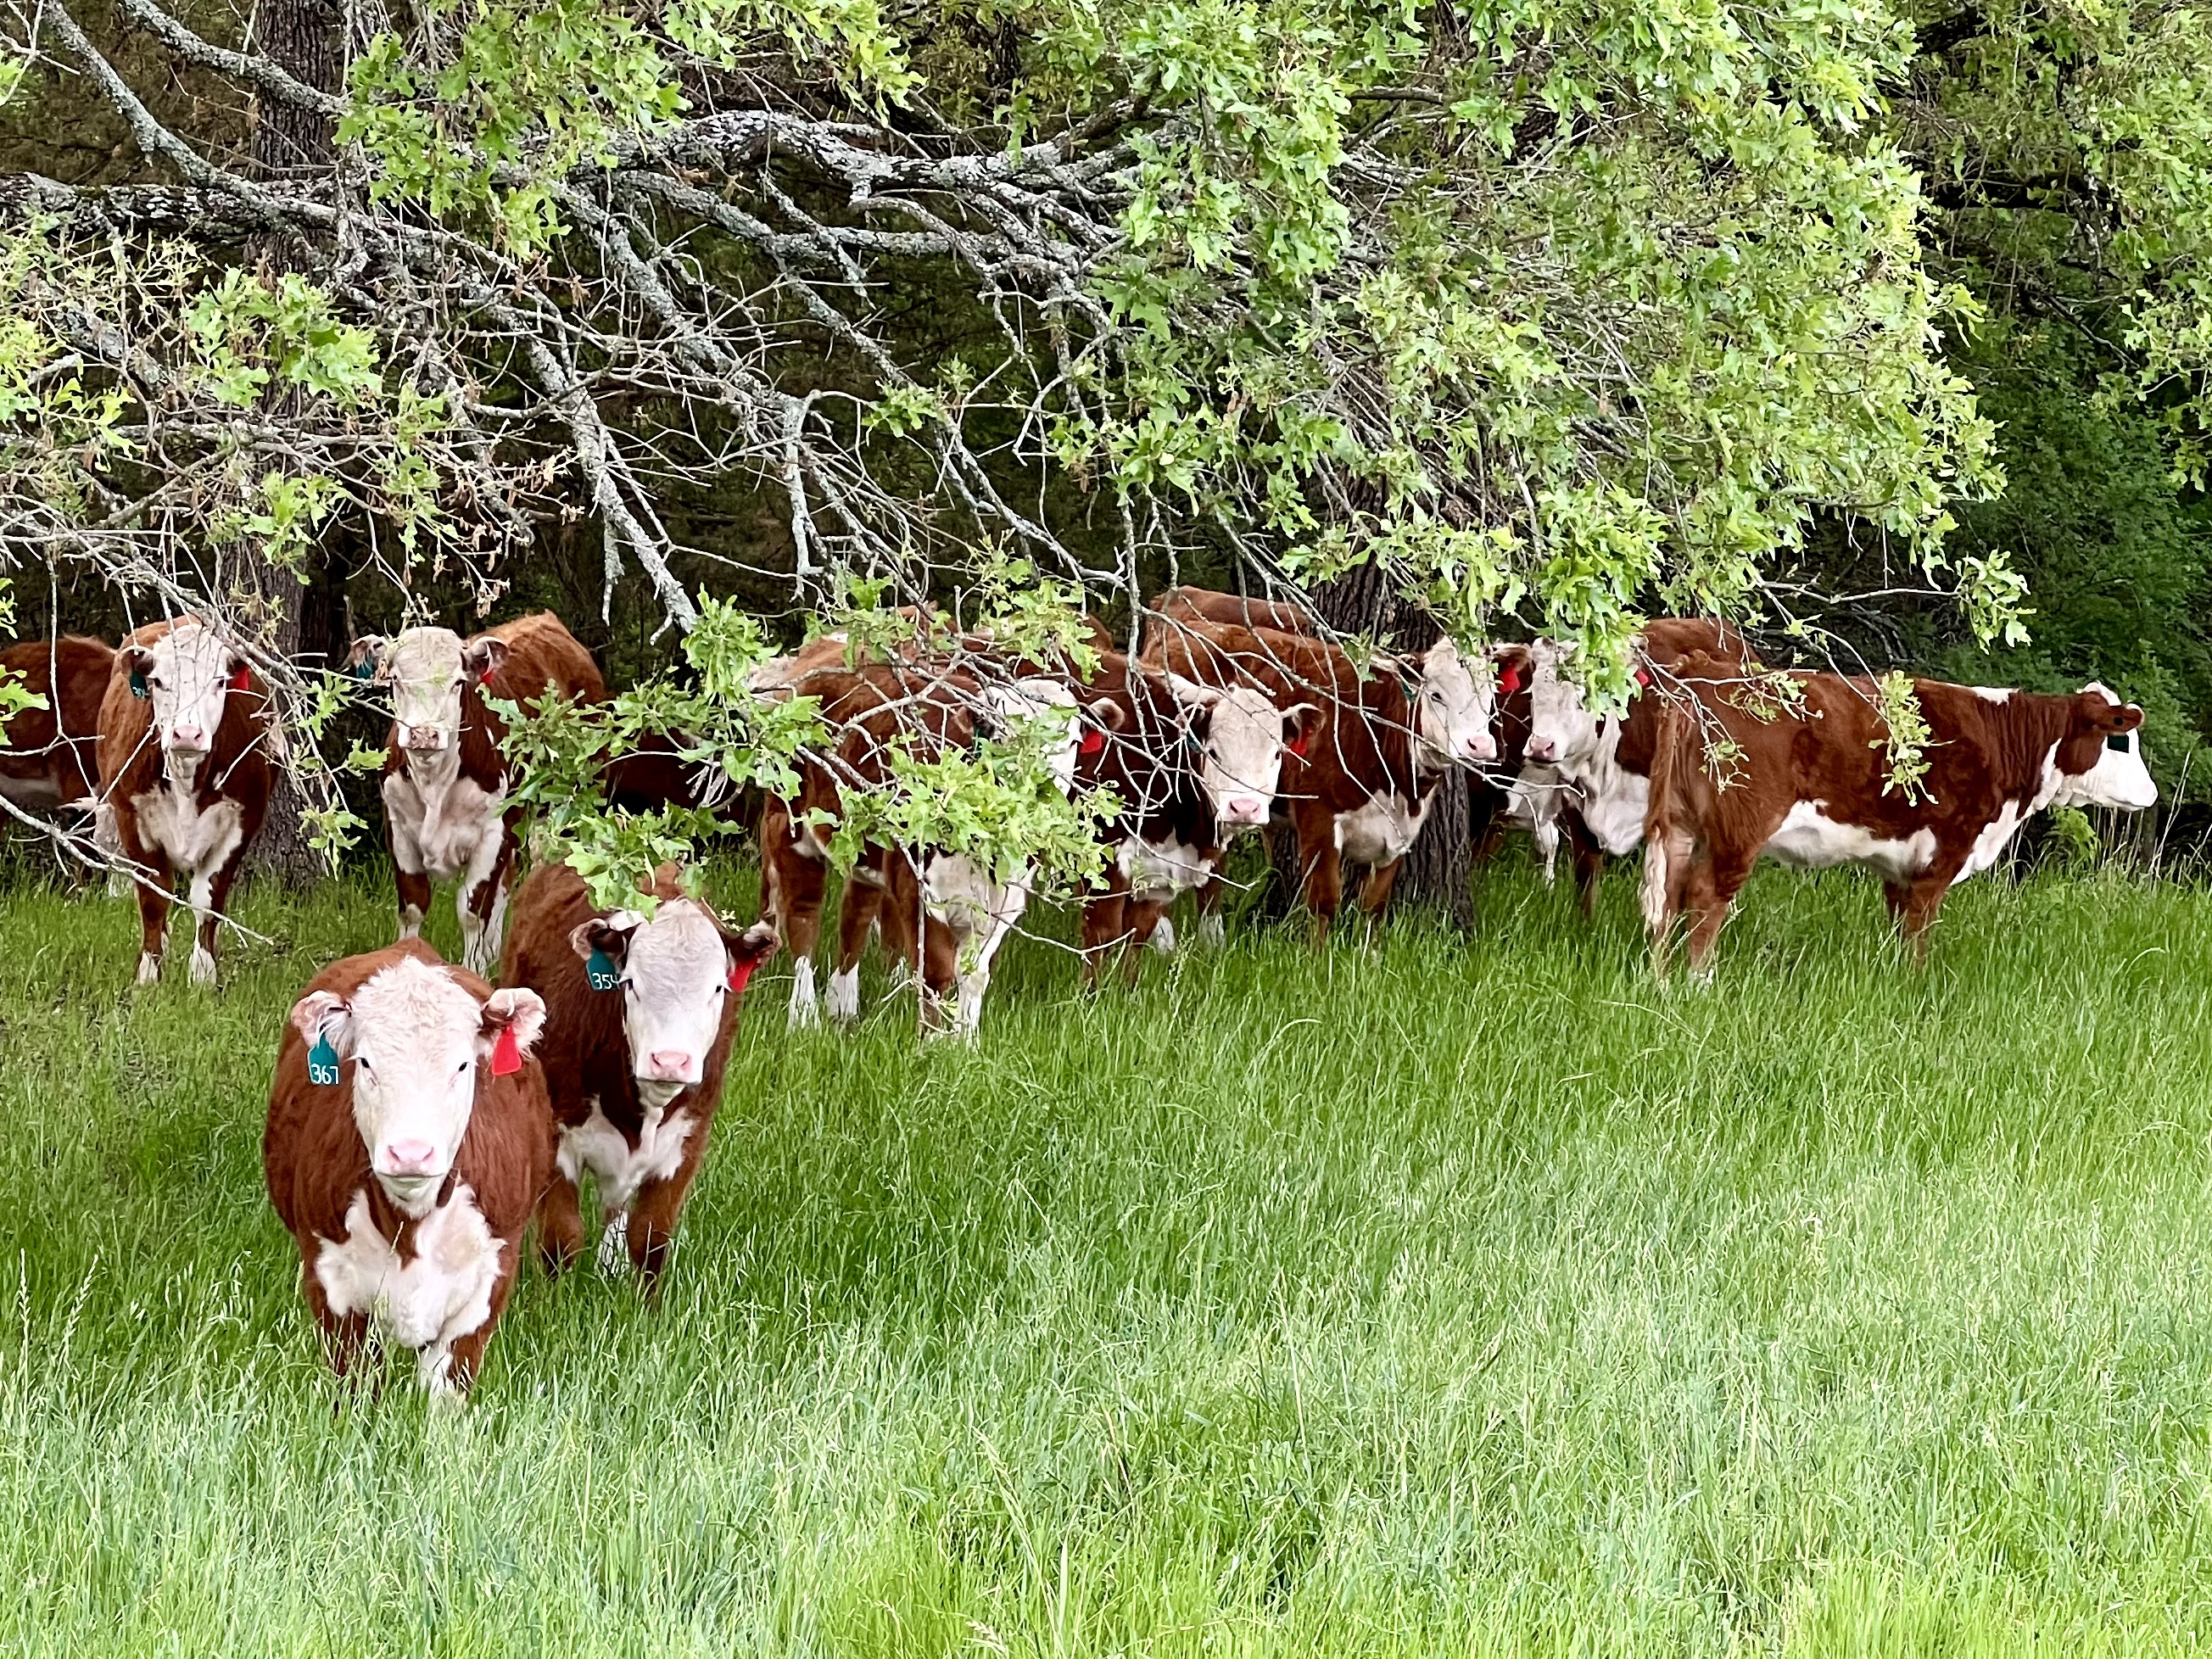 15 Open, Registered Polled Hereford Heifers